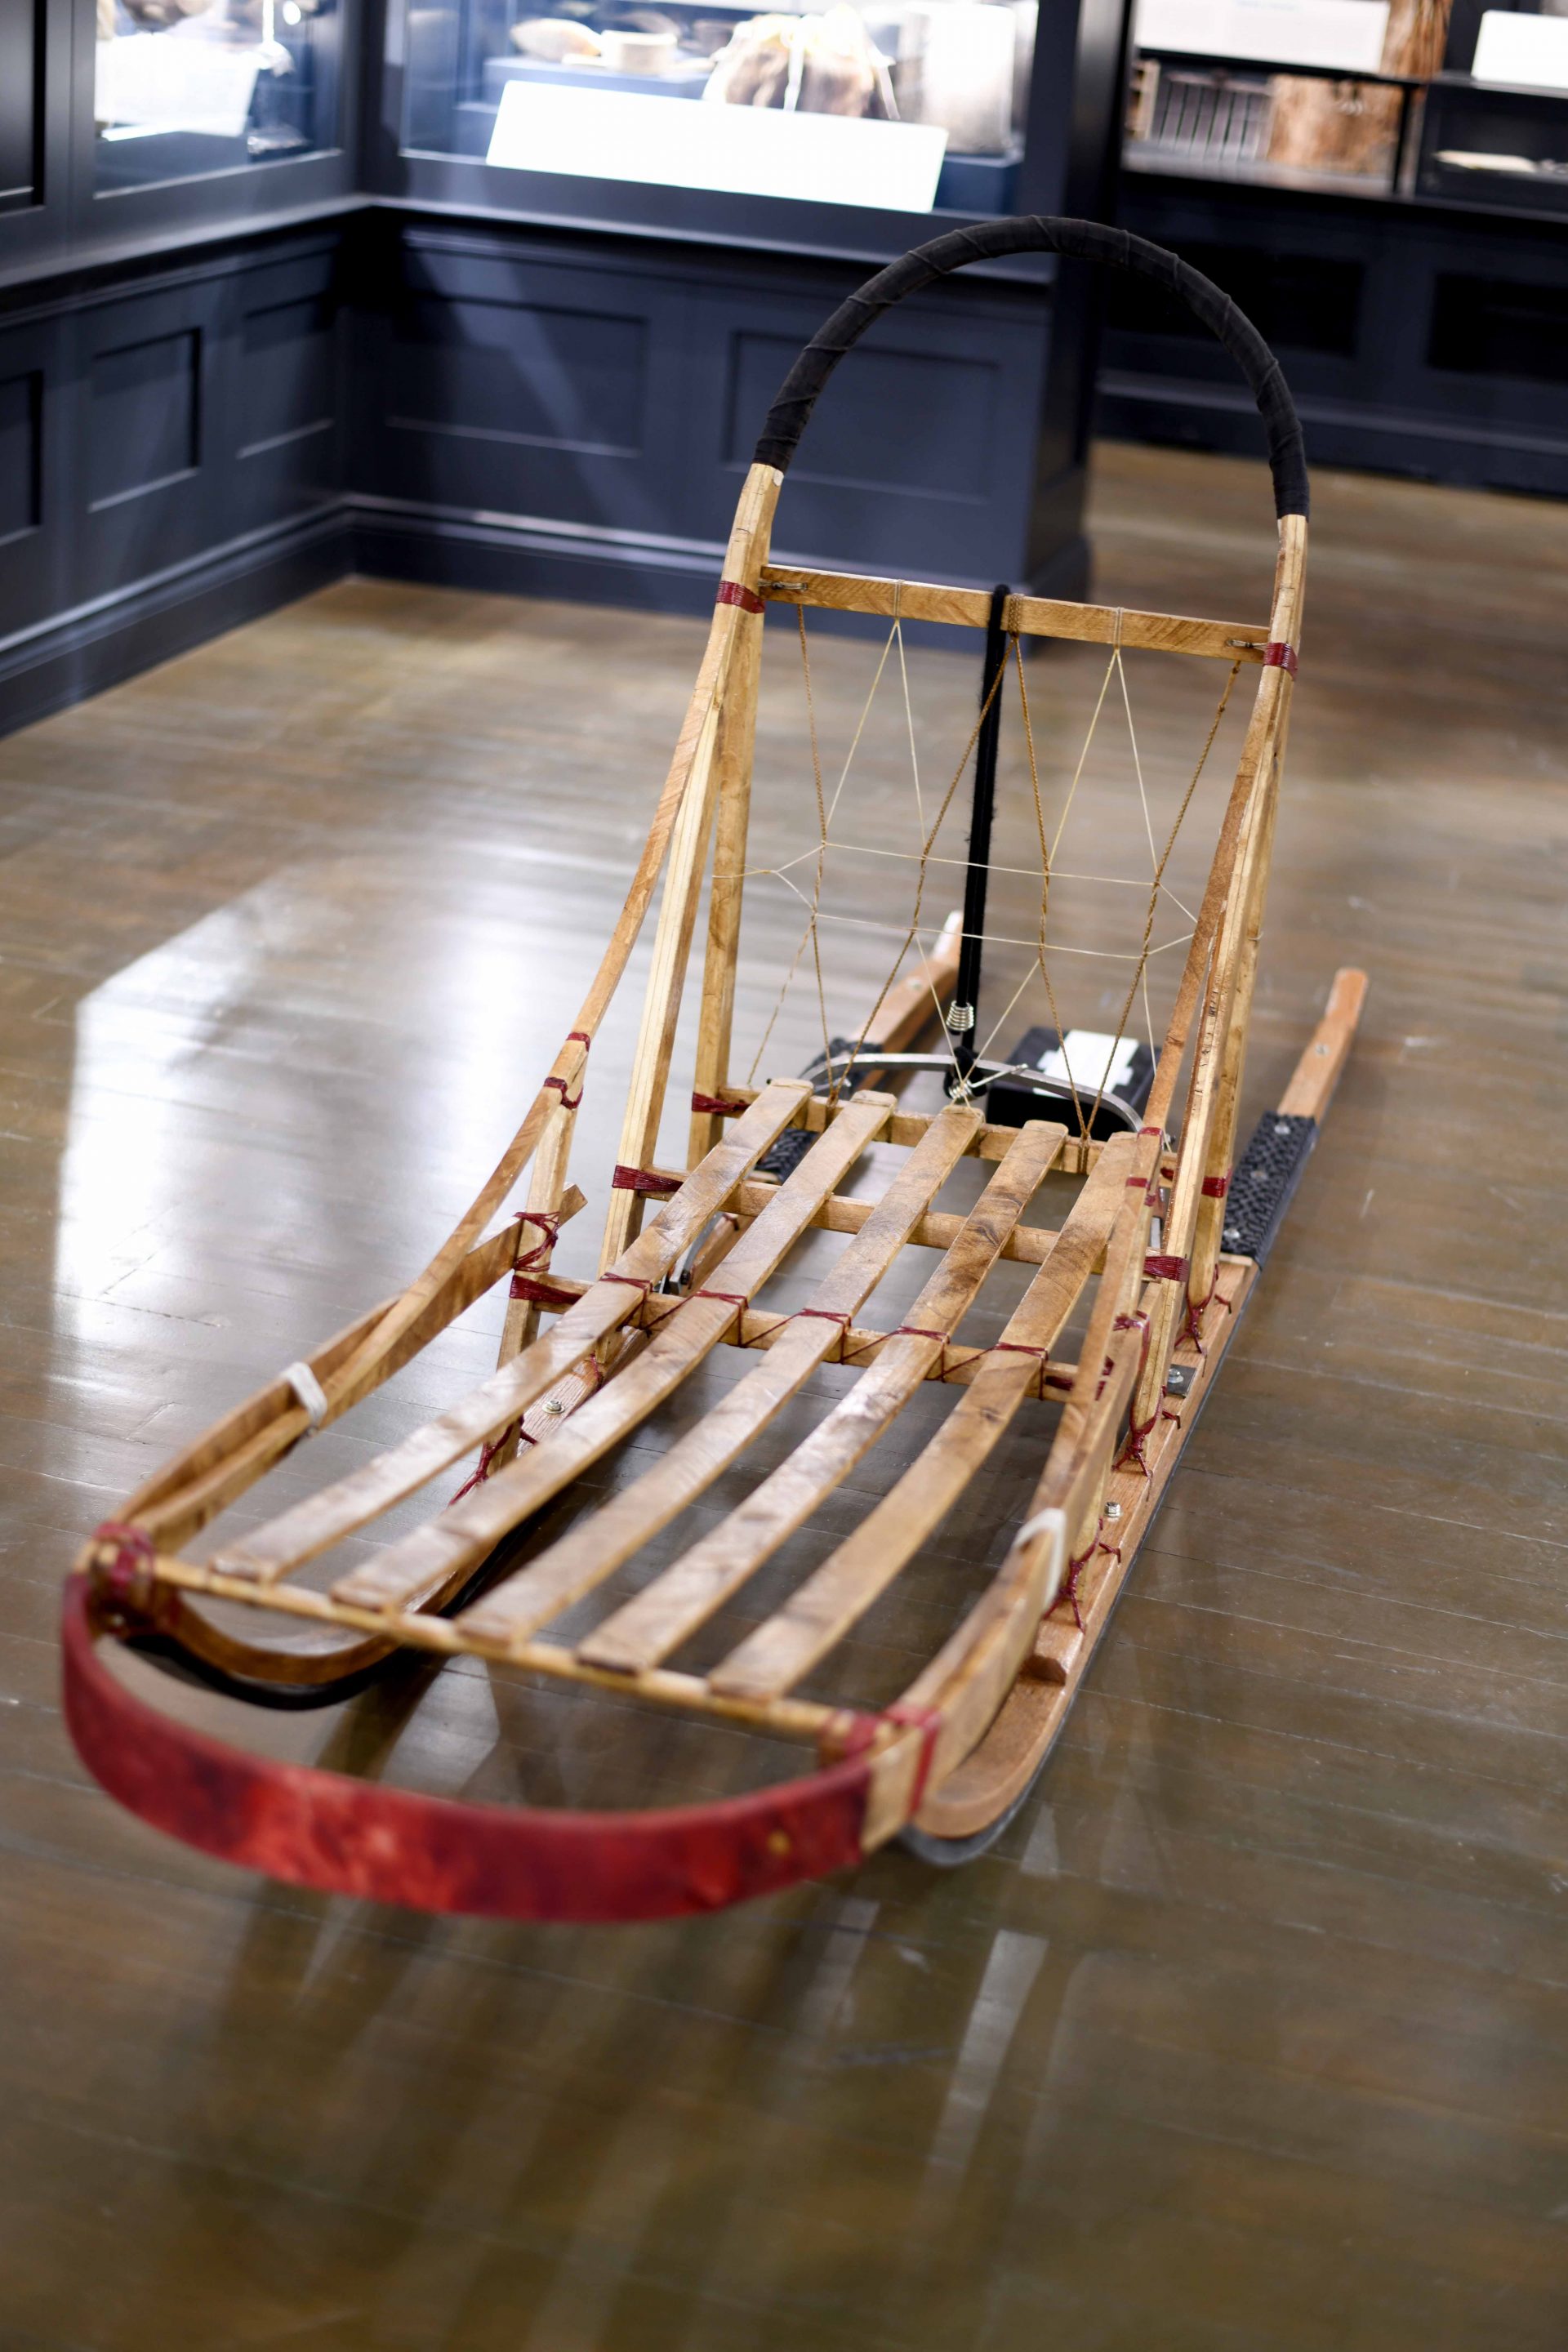 Handmade Sled by Remy LeBoutellier